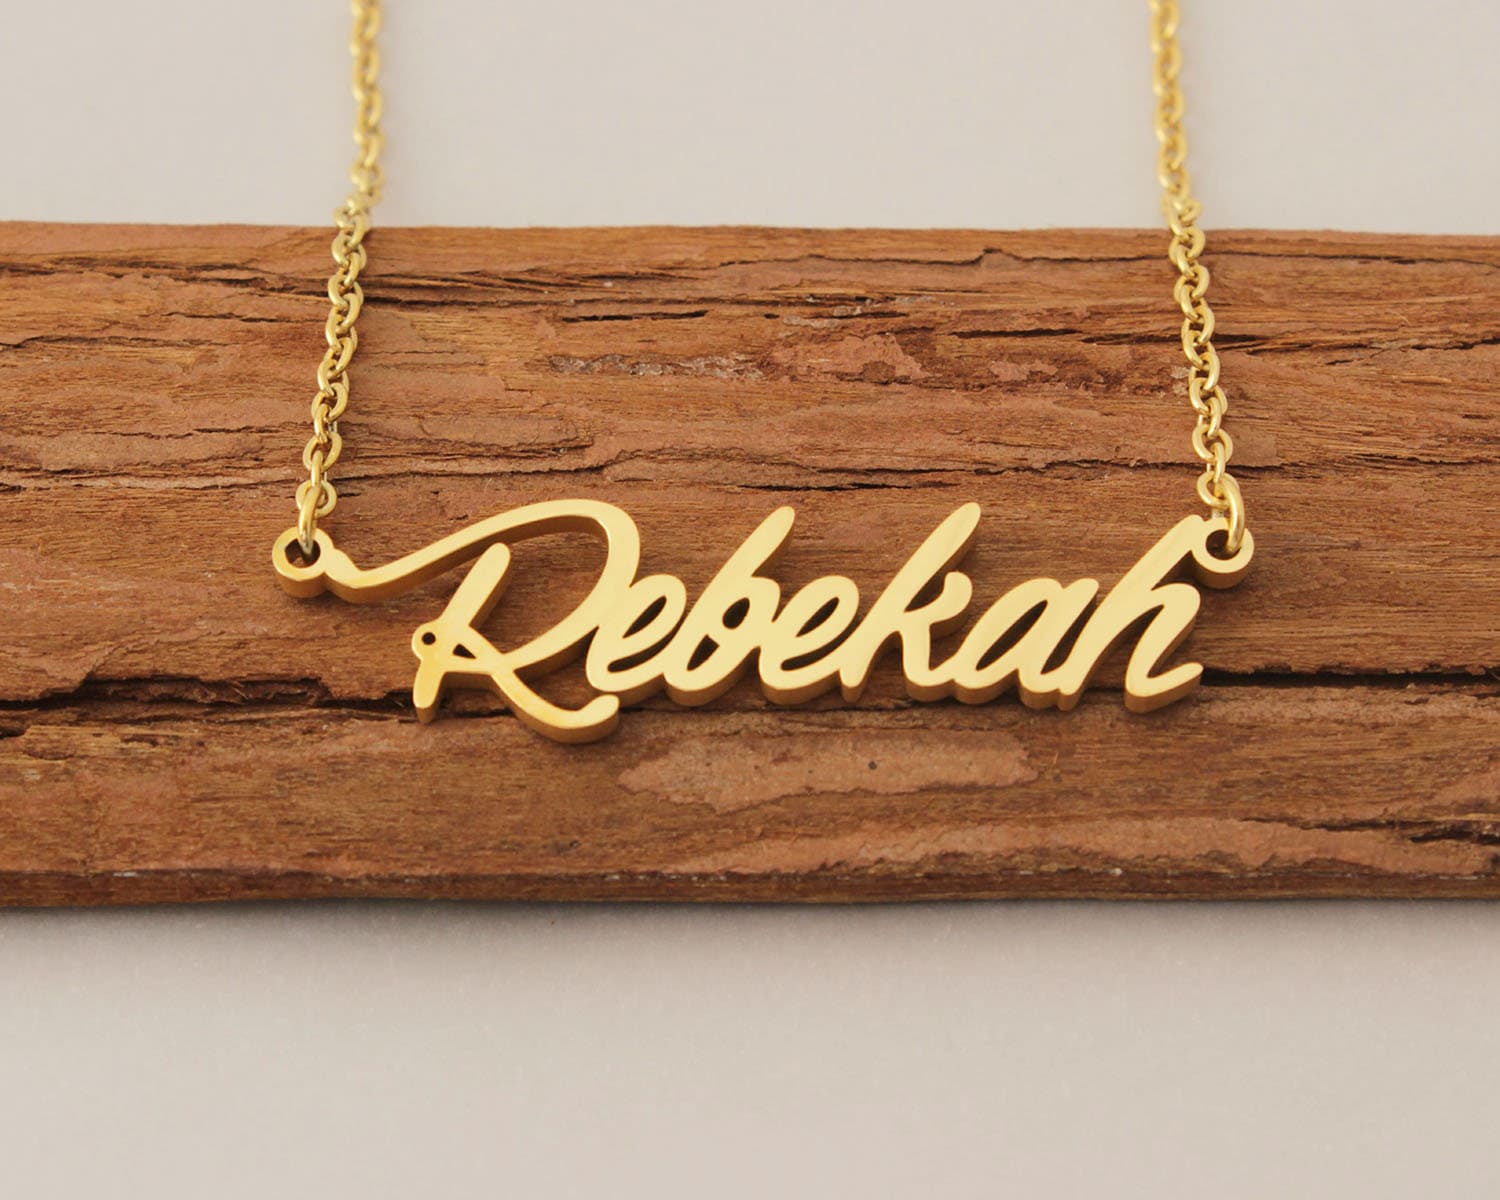 Name Necklace, Rebekah Name Necklace Gold, Cursive Any Name on Necklace, Personalized Name Jewelry Birthday Gift for Sister